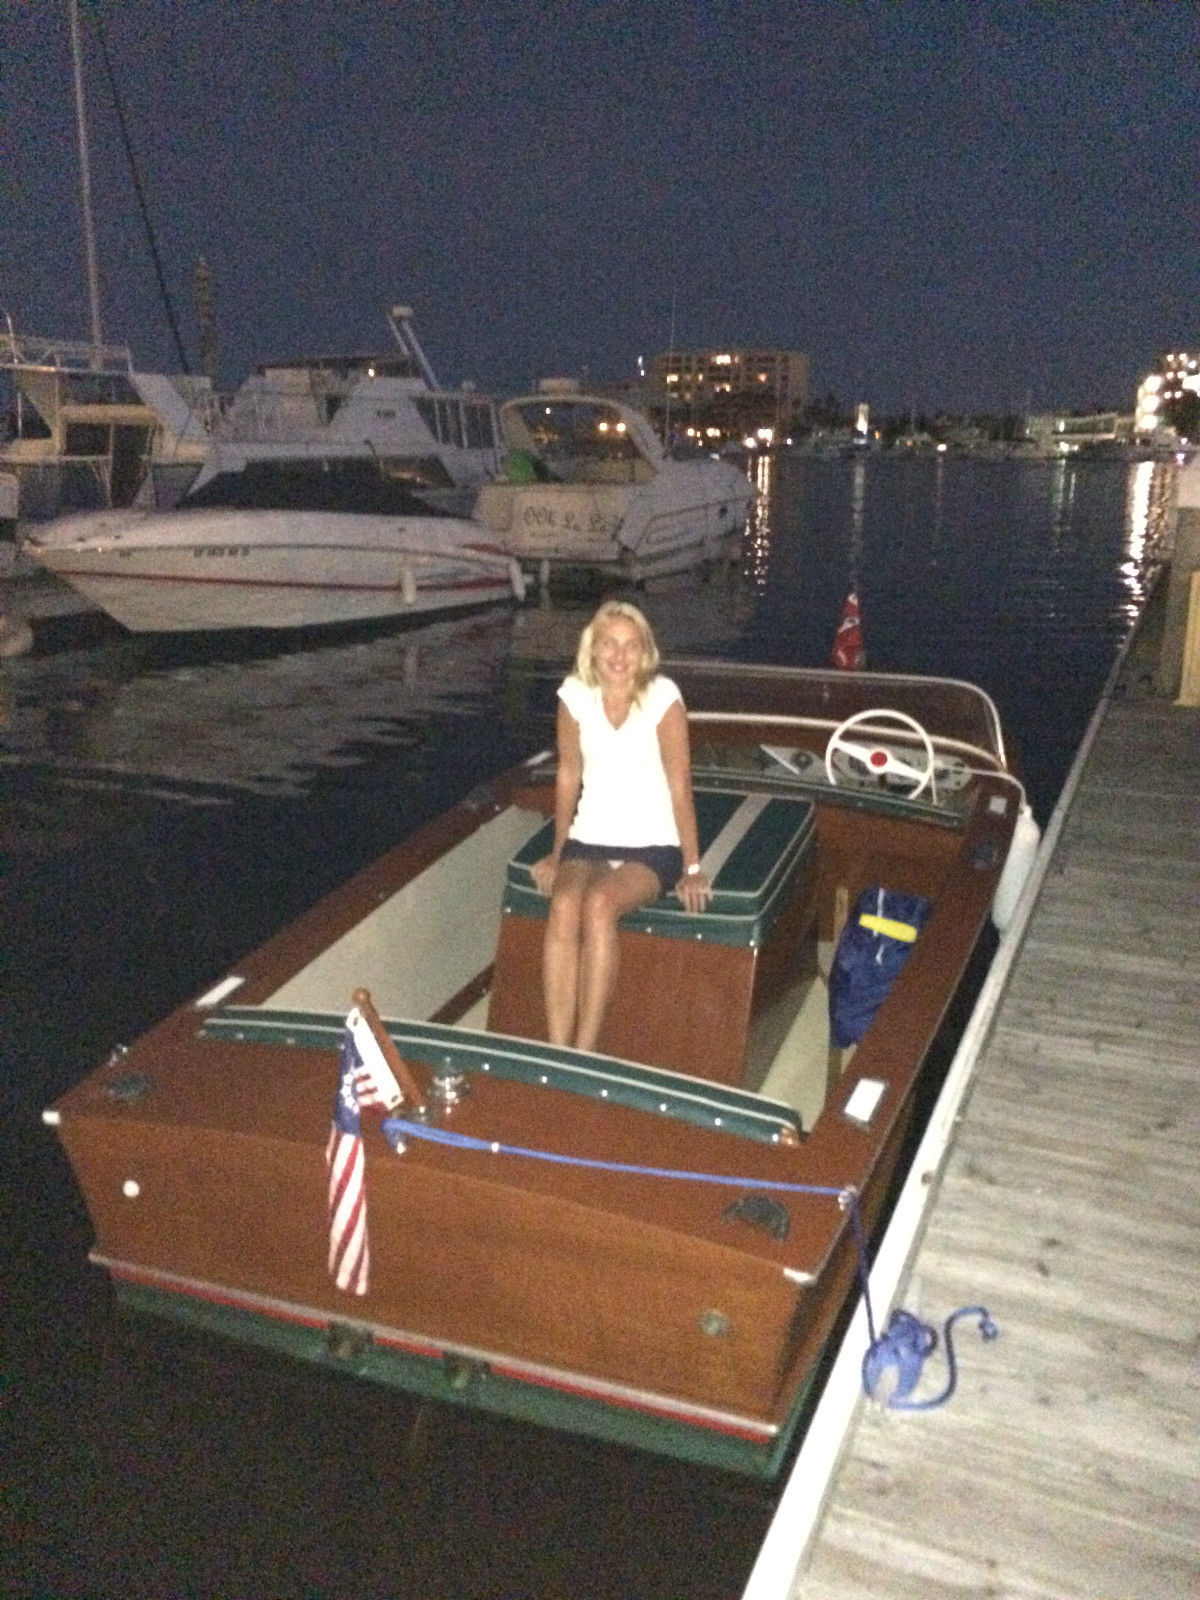 Chris Craft Cavalier Classic Wood Boat 1959 for sale for ...